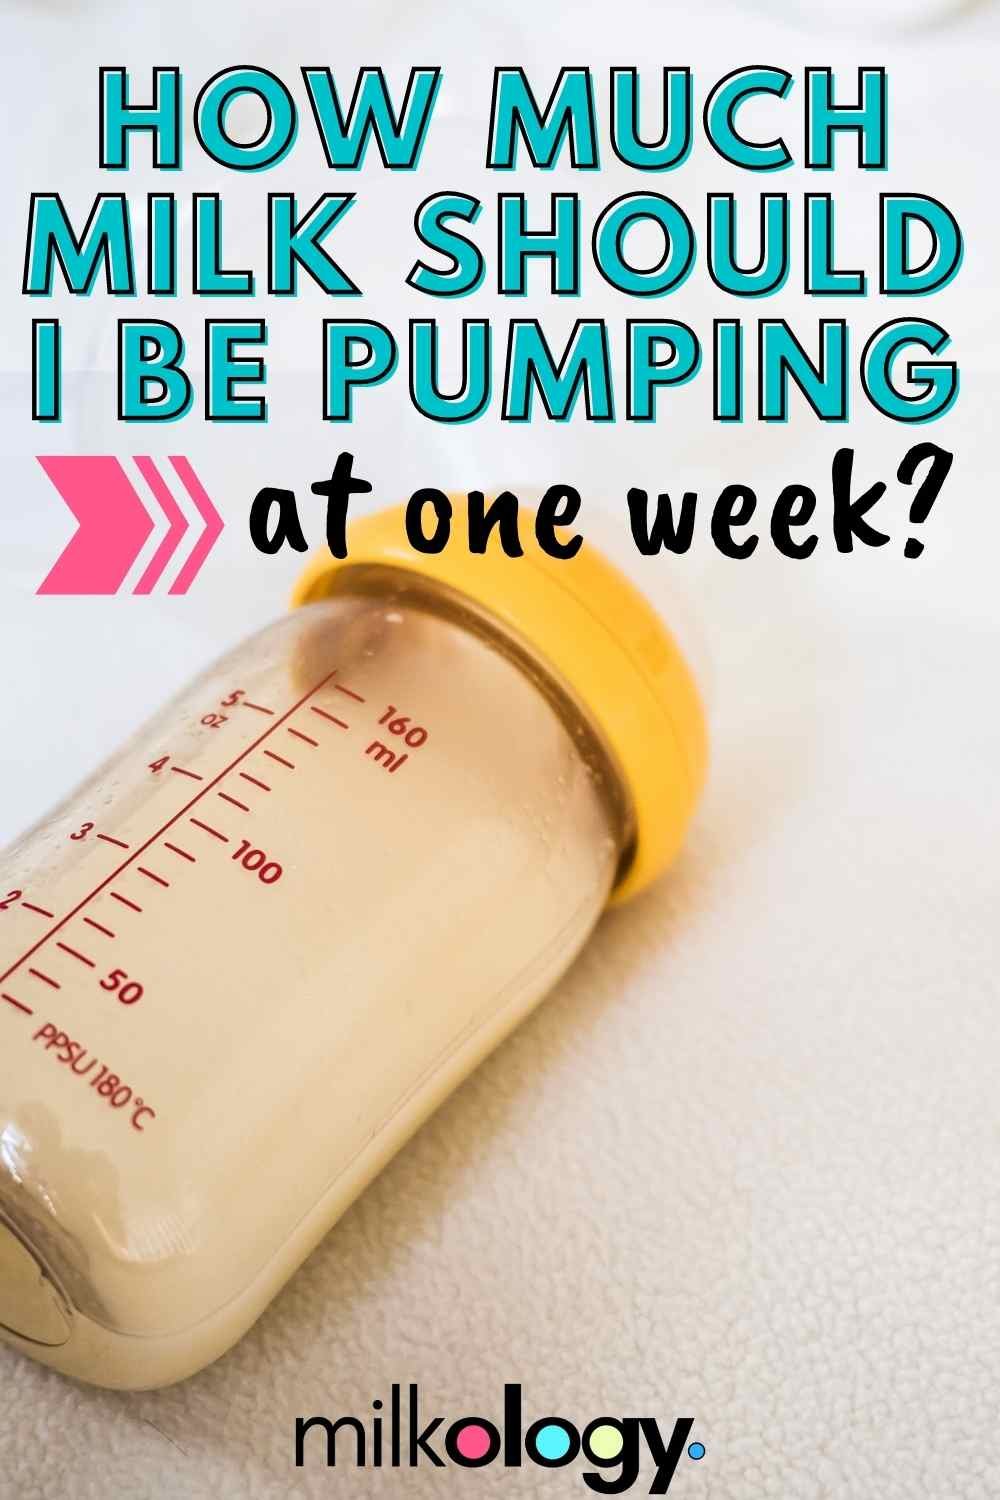 How Much Milk Should I Be Pumping At One Week? — Milkology®